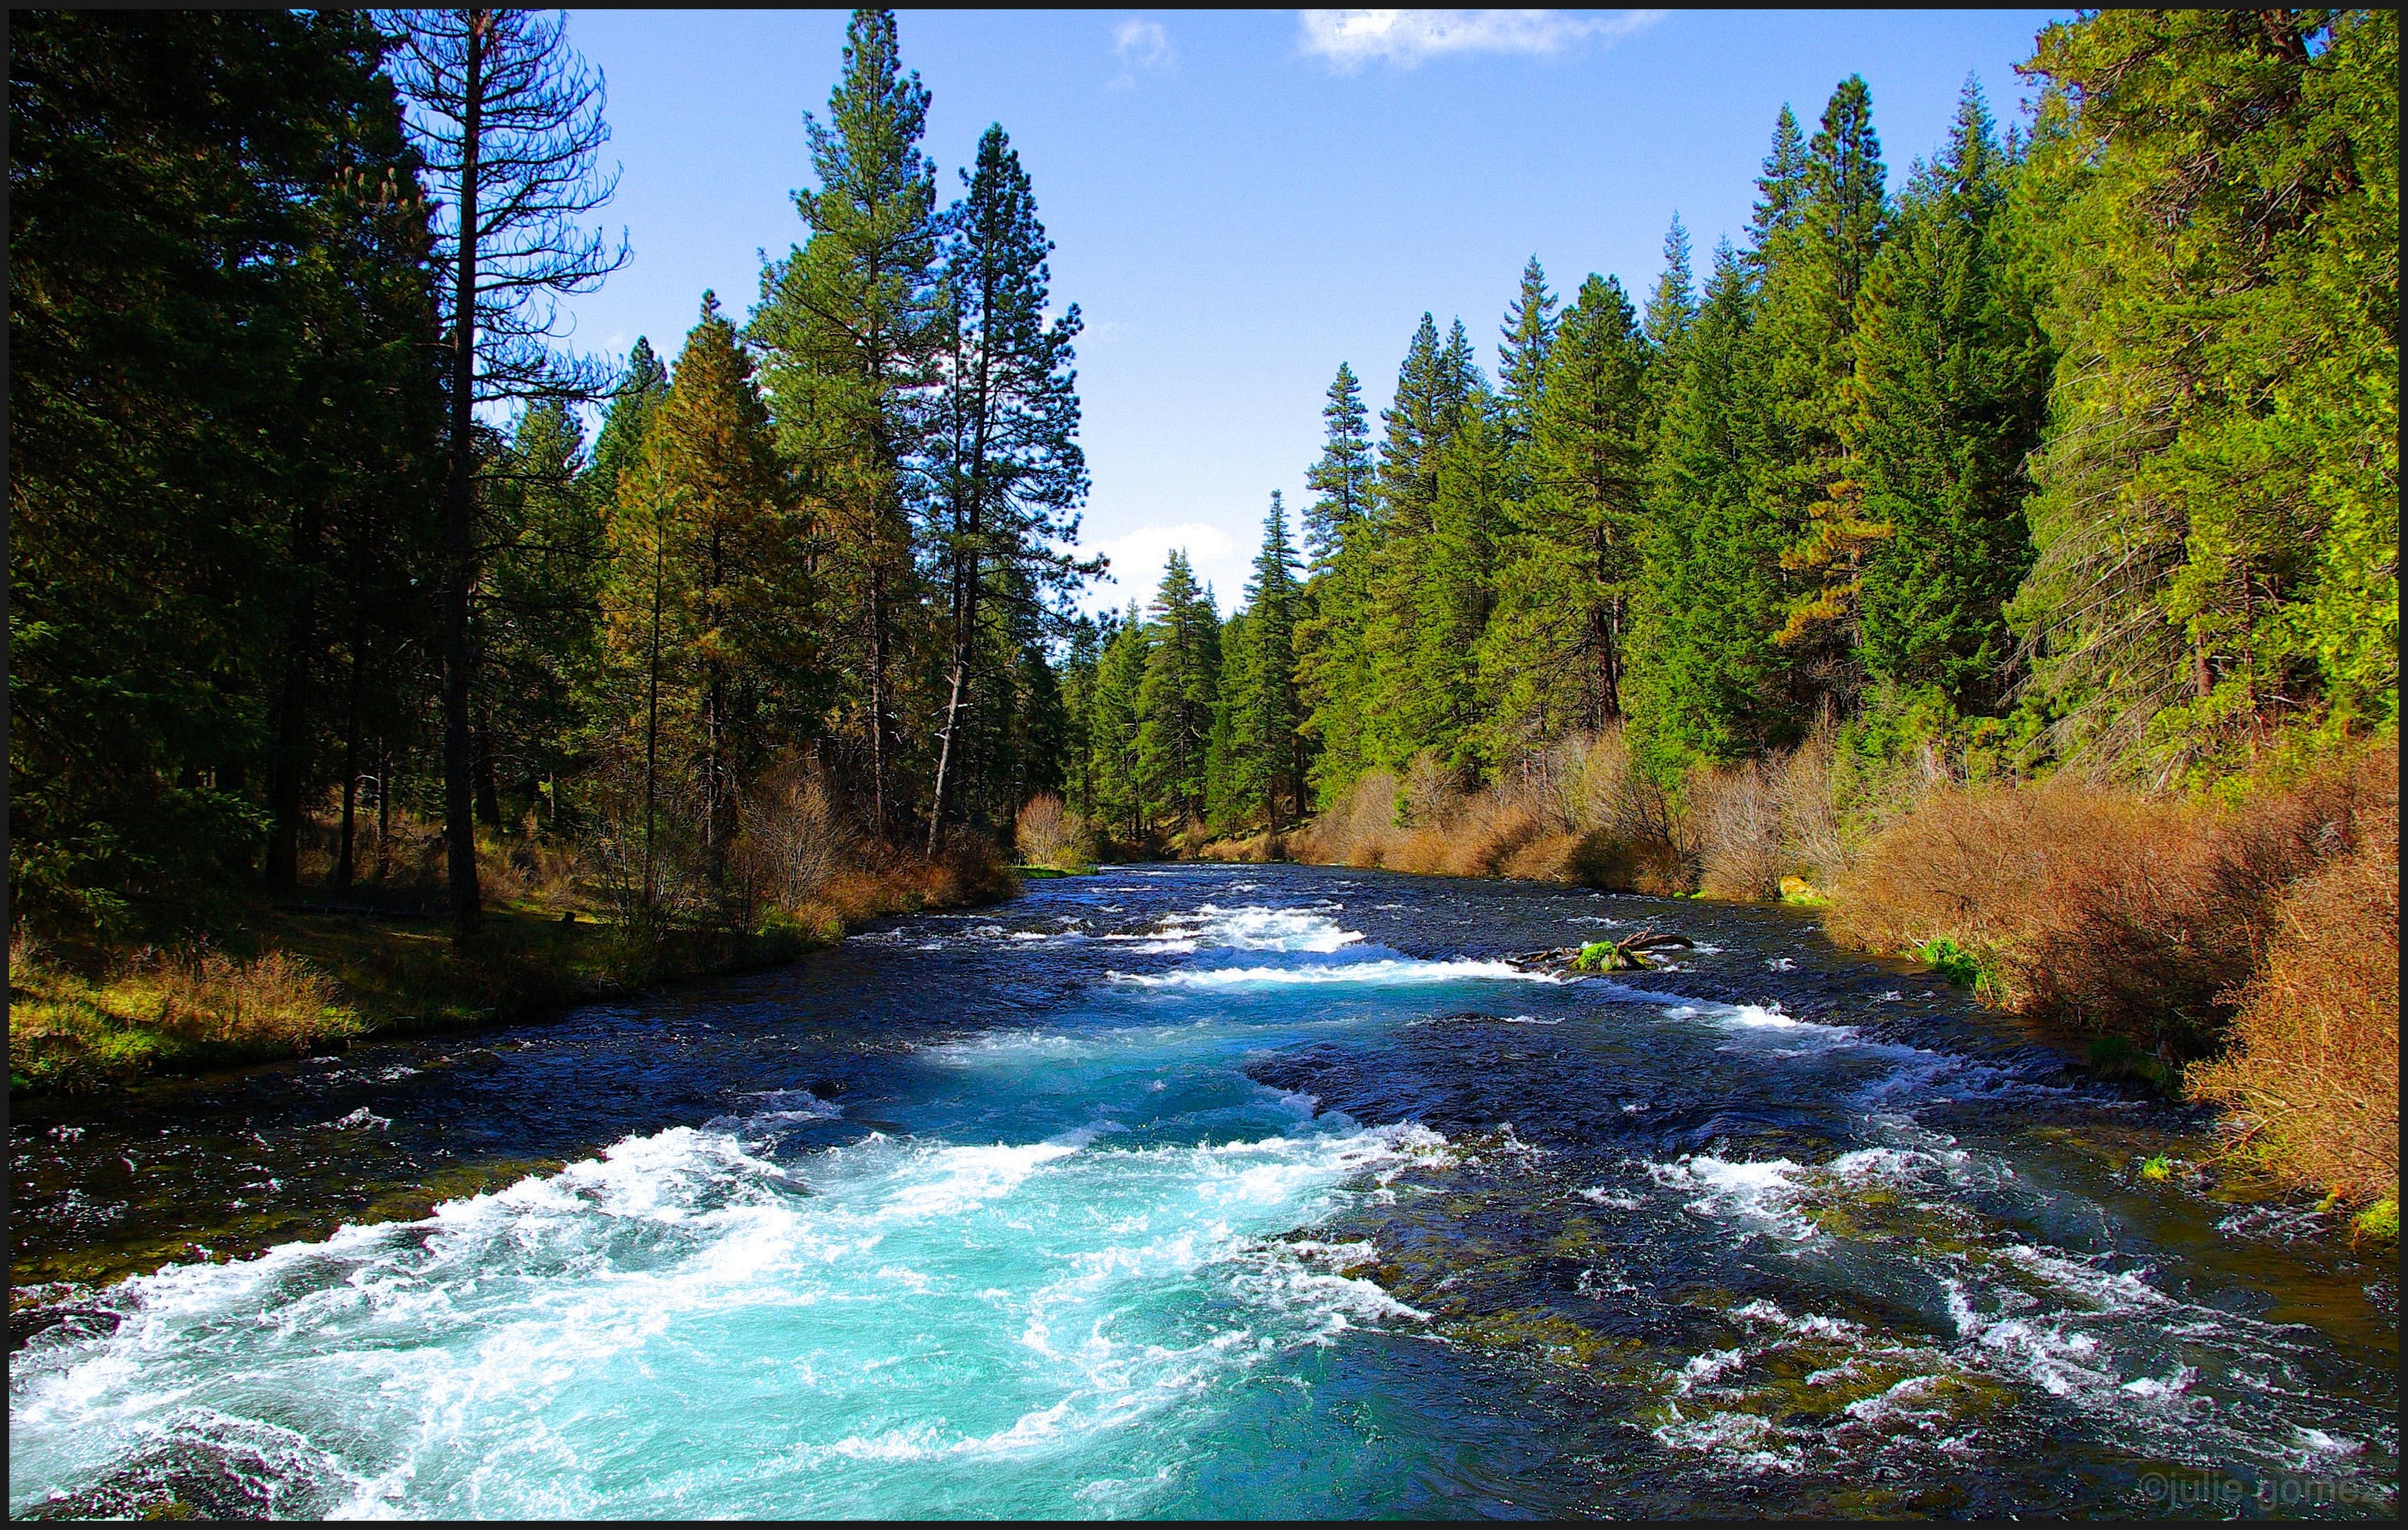 Image result for Metolius river images